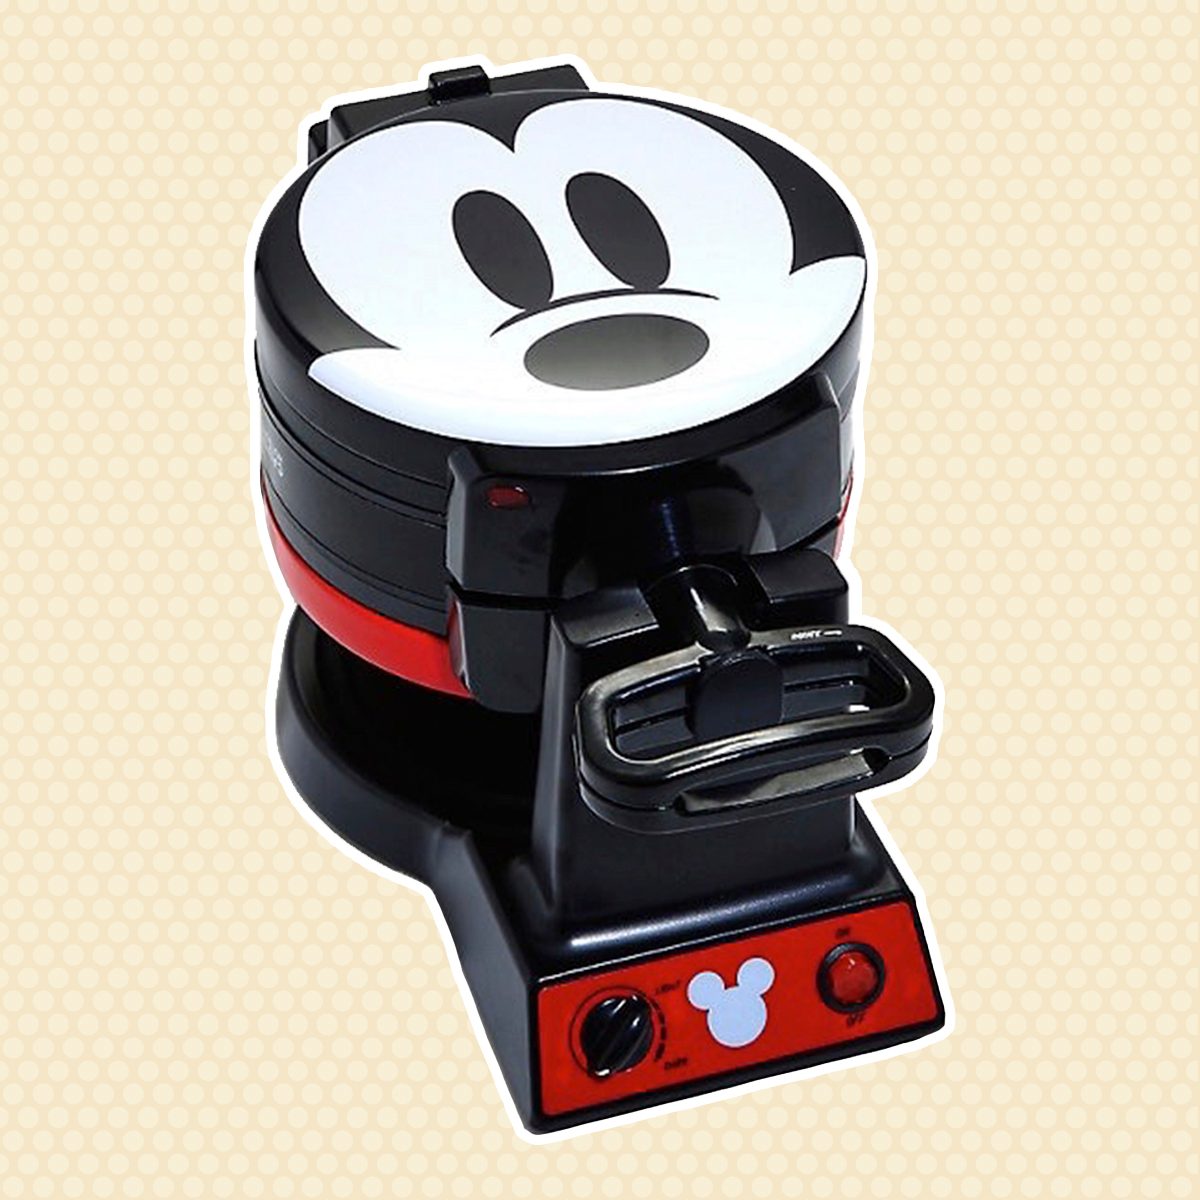 5 Disney Kitchen Gadgets That You Didn't Know Existed - Disney in